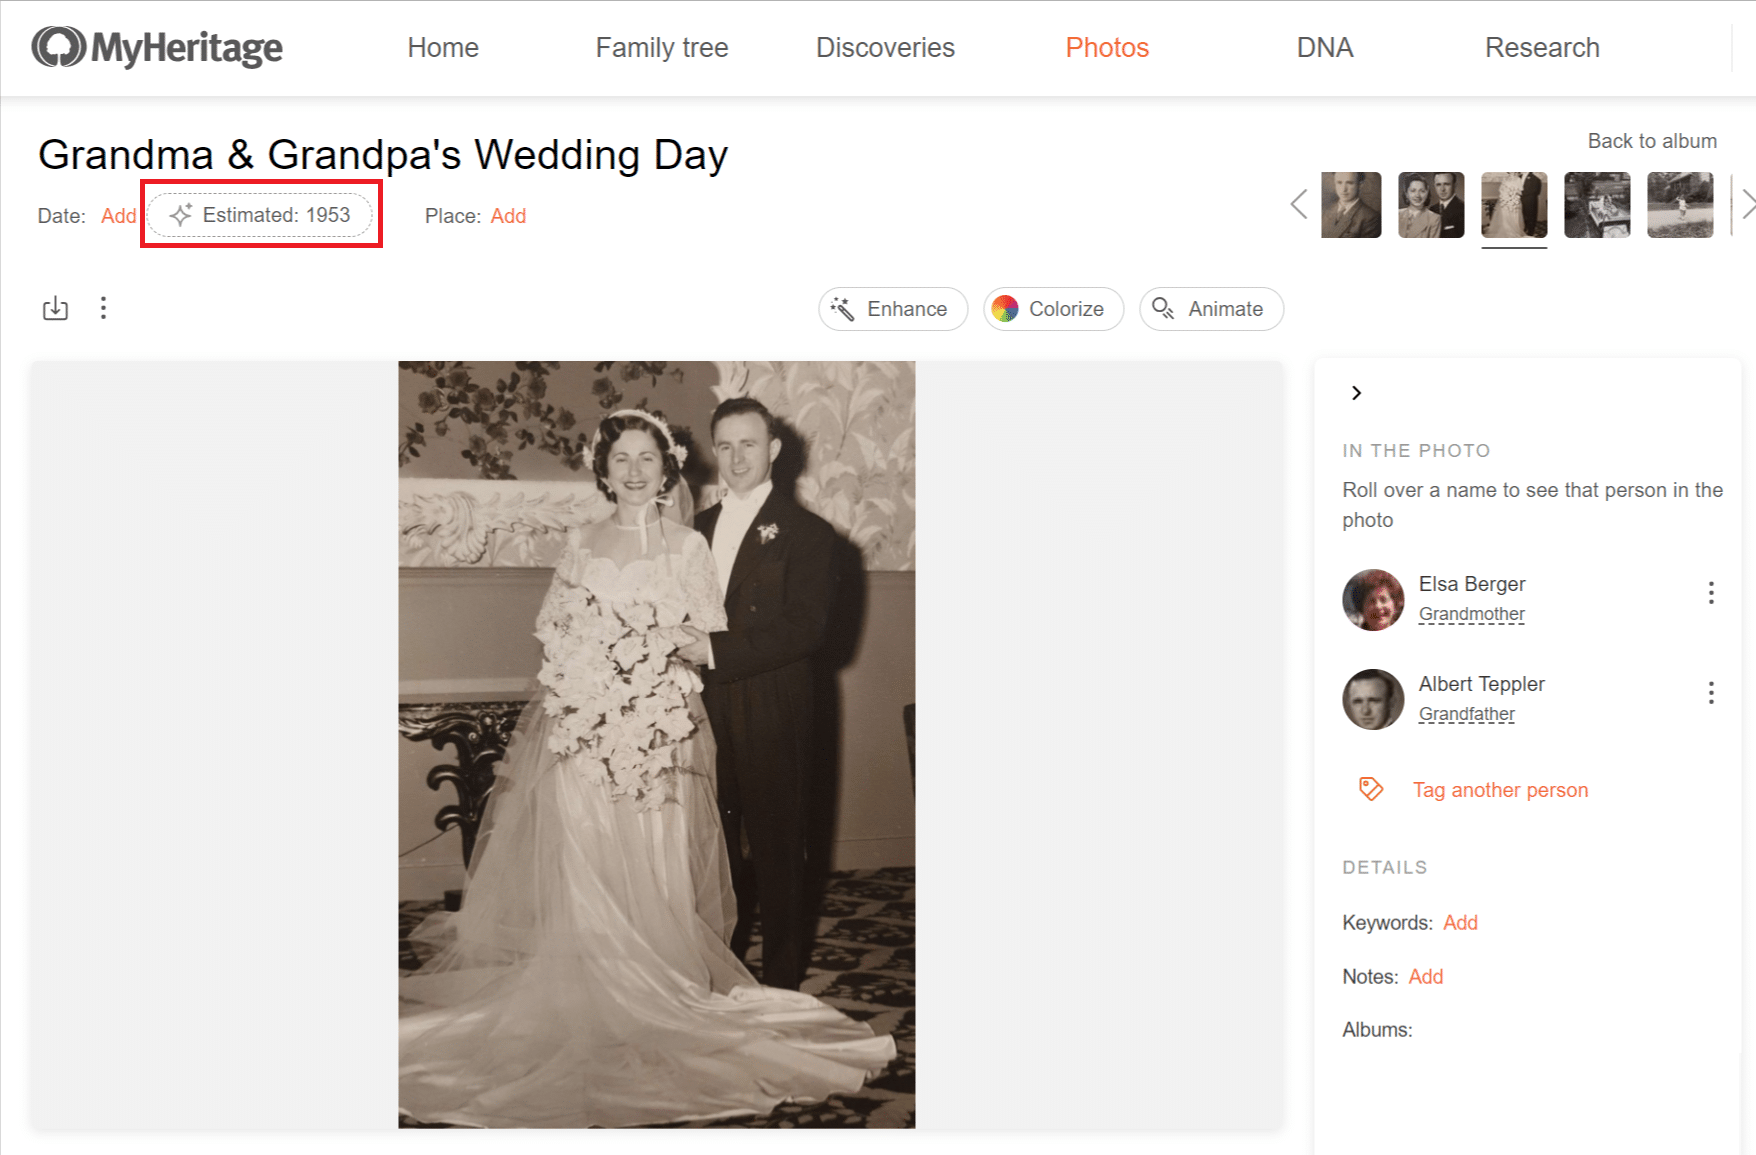 Photo Page: Date estimates will automatically appear for undated photos, as marked in red